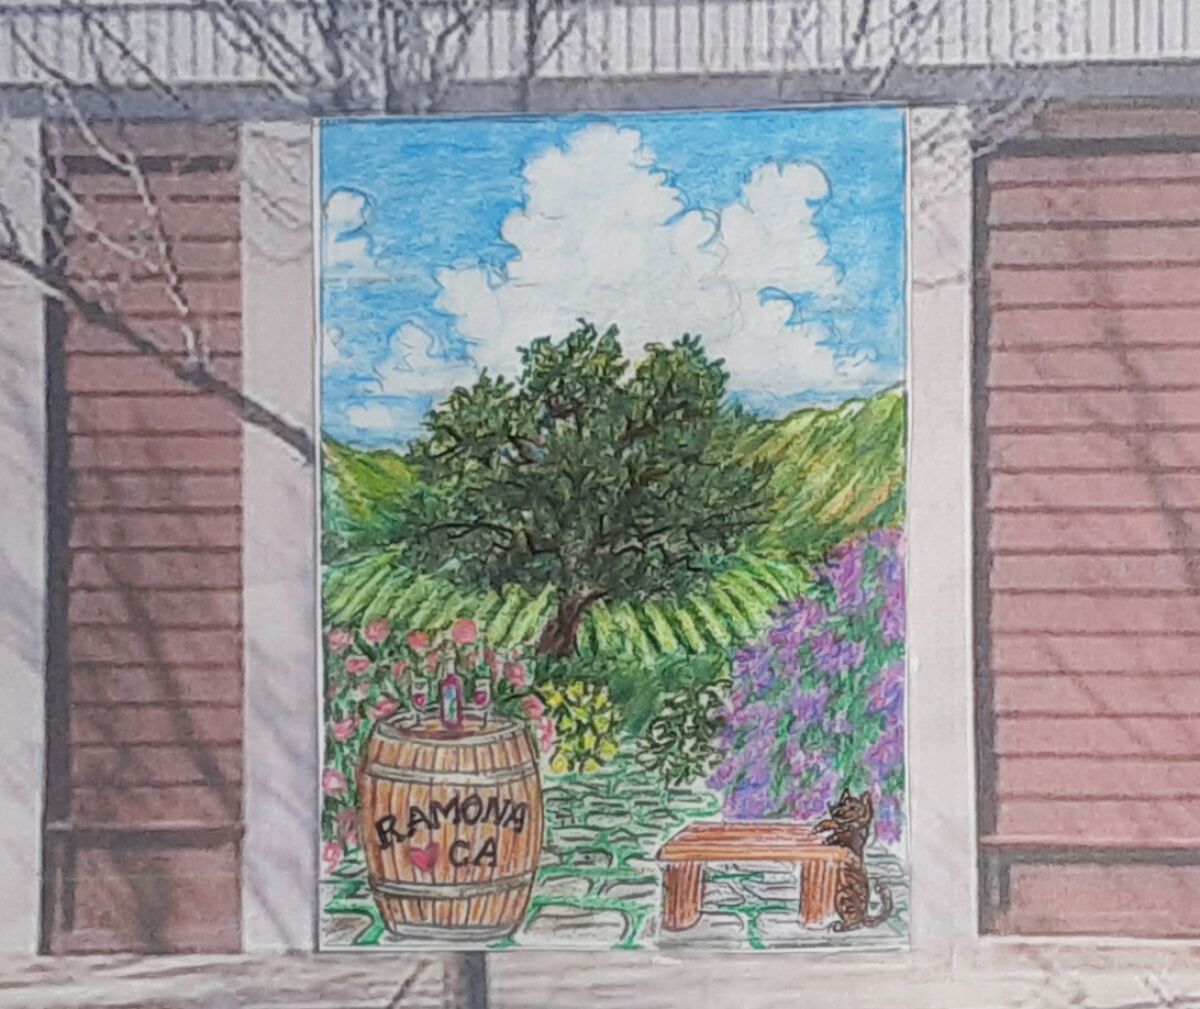 This sketch shows how the mural will give the impression that someone can walk down a path and into a vineyard or drink wine.